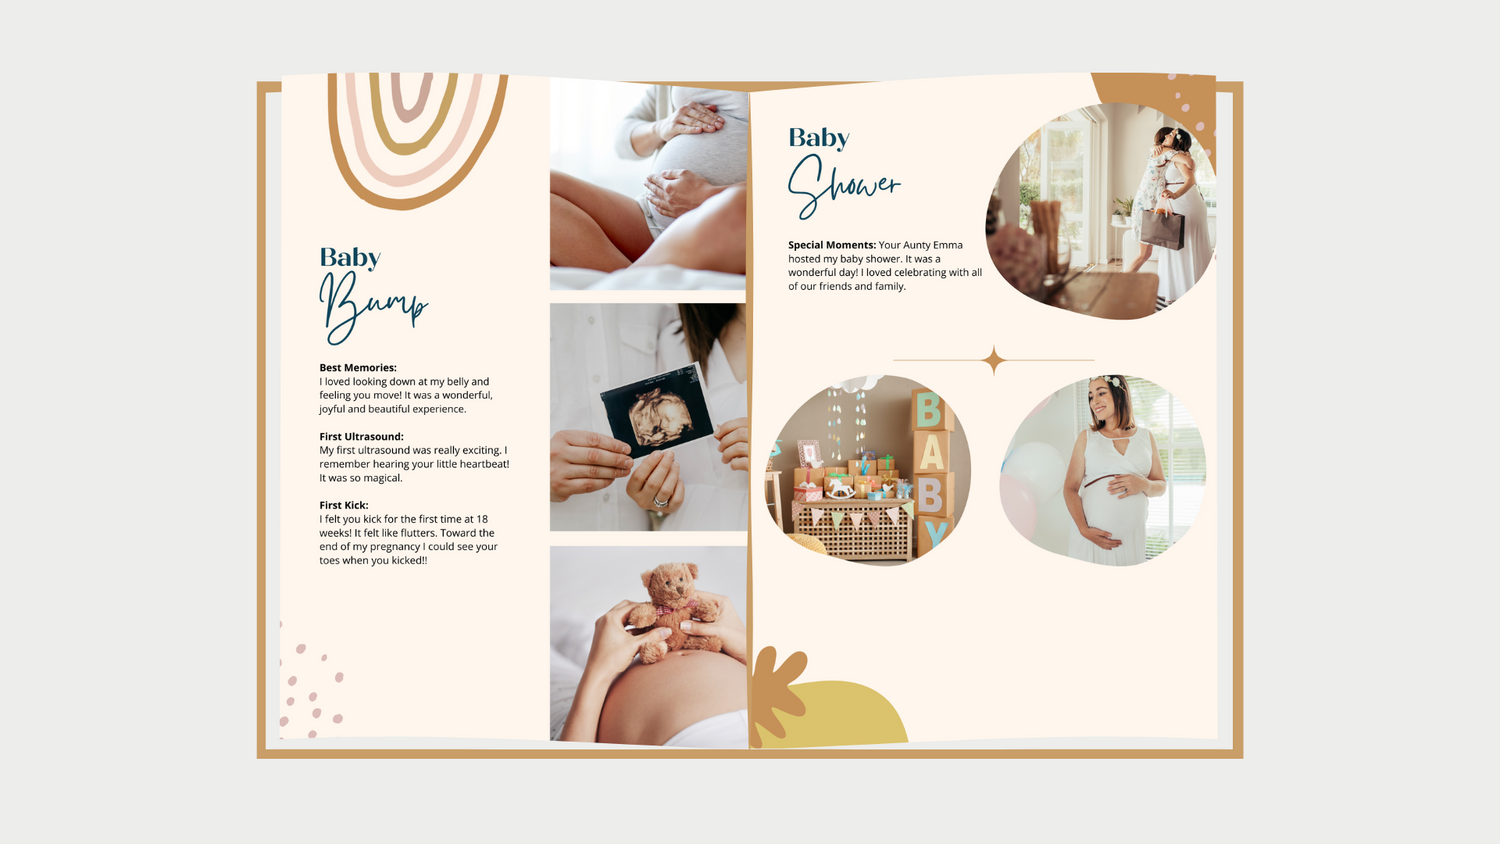 pregnancy & baby shower pages of Dujourbaby pregnancy book